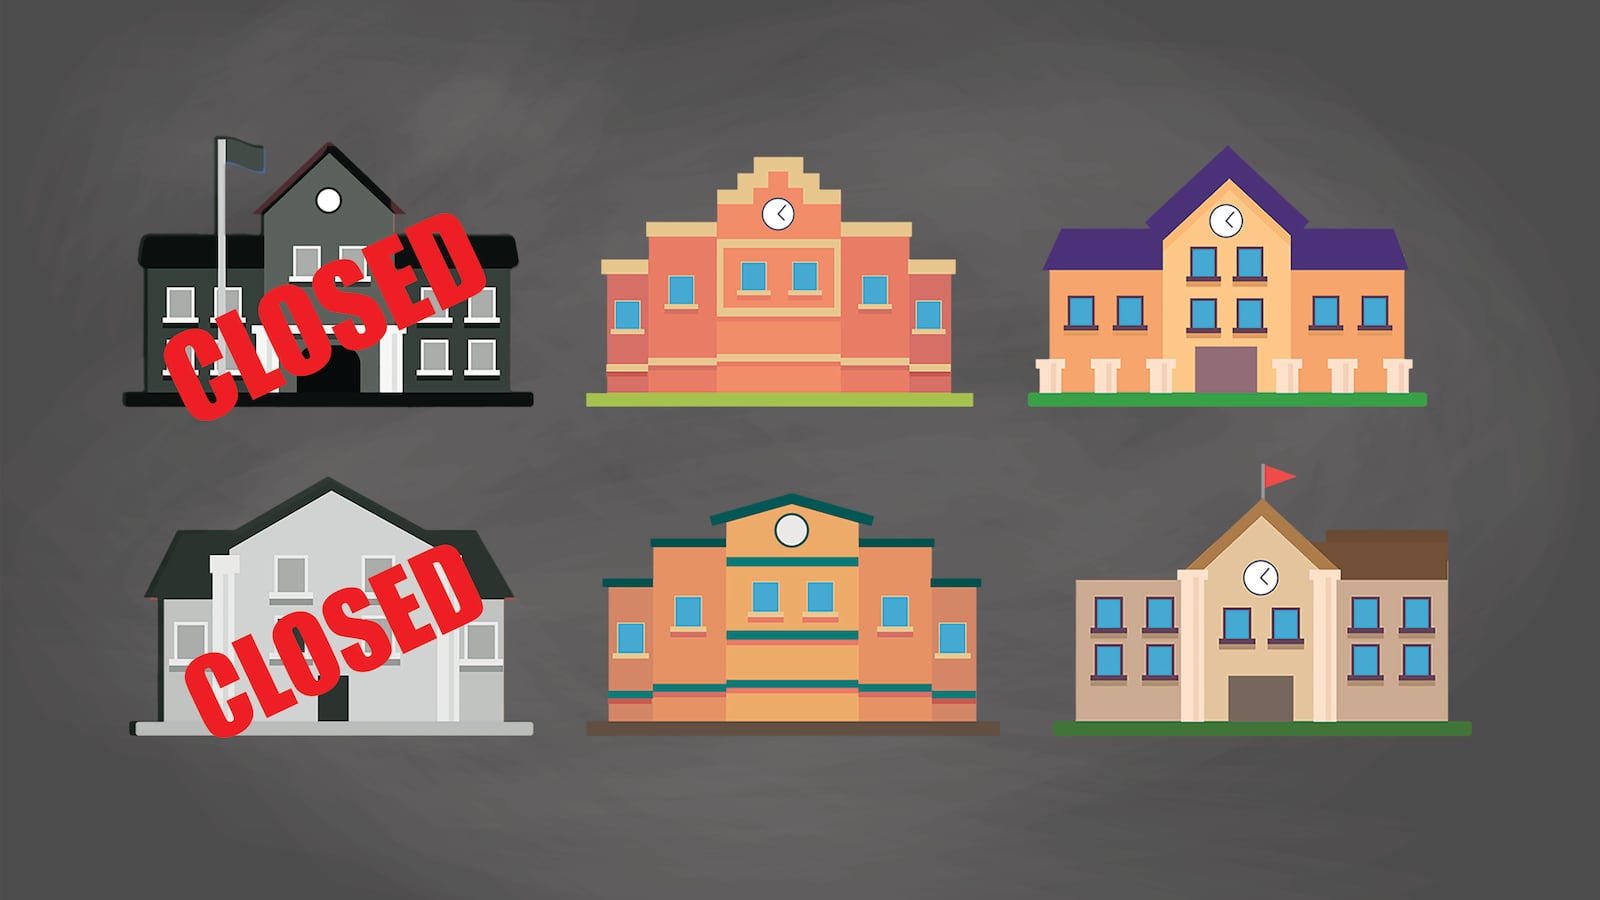 There are six illustrations of schools in rows of three. Two schools on the left are in black and white with red letters that say "CLOSED," and the four other schools are in color. There is a dark, grey background that mimics a chalkboard.